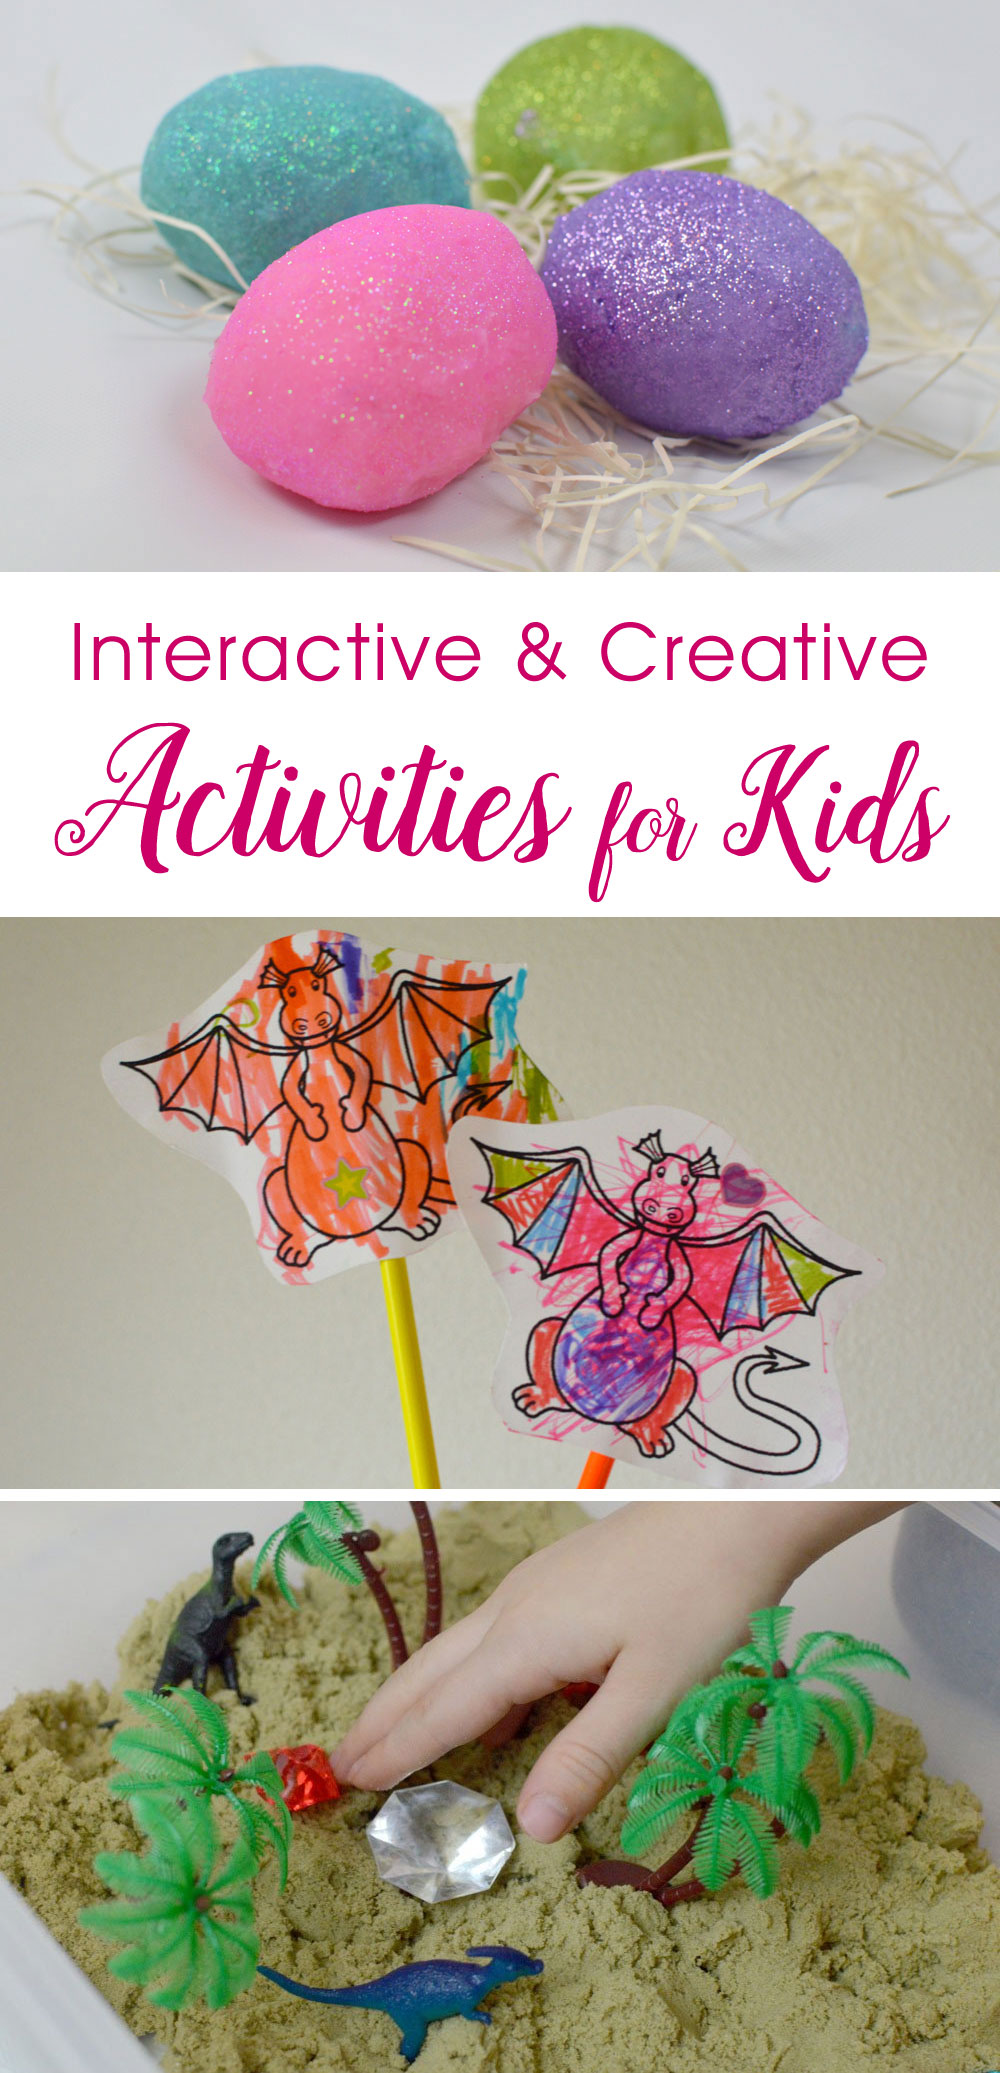 Sensory sparkle playdough, DIY character puppets, and discovery boxes